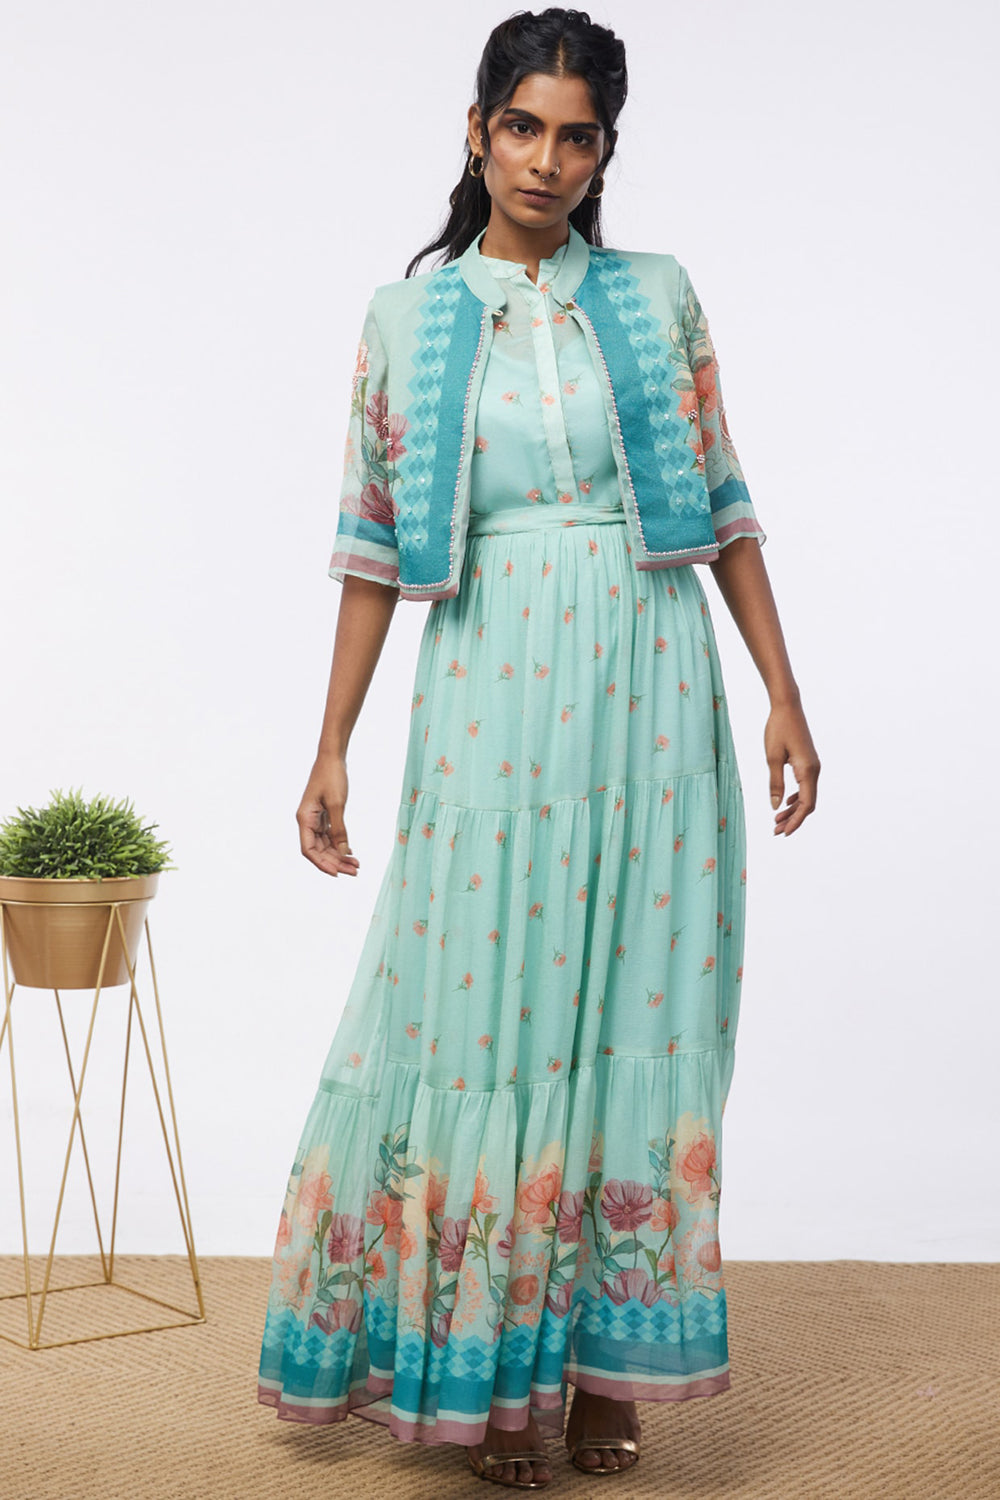 Blooming Bud Printed Tiered Dress With Jacket